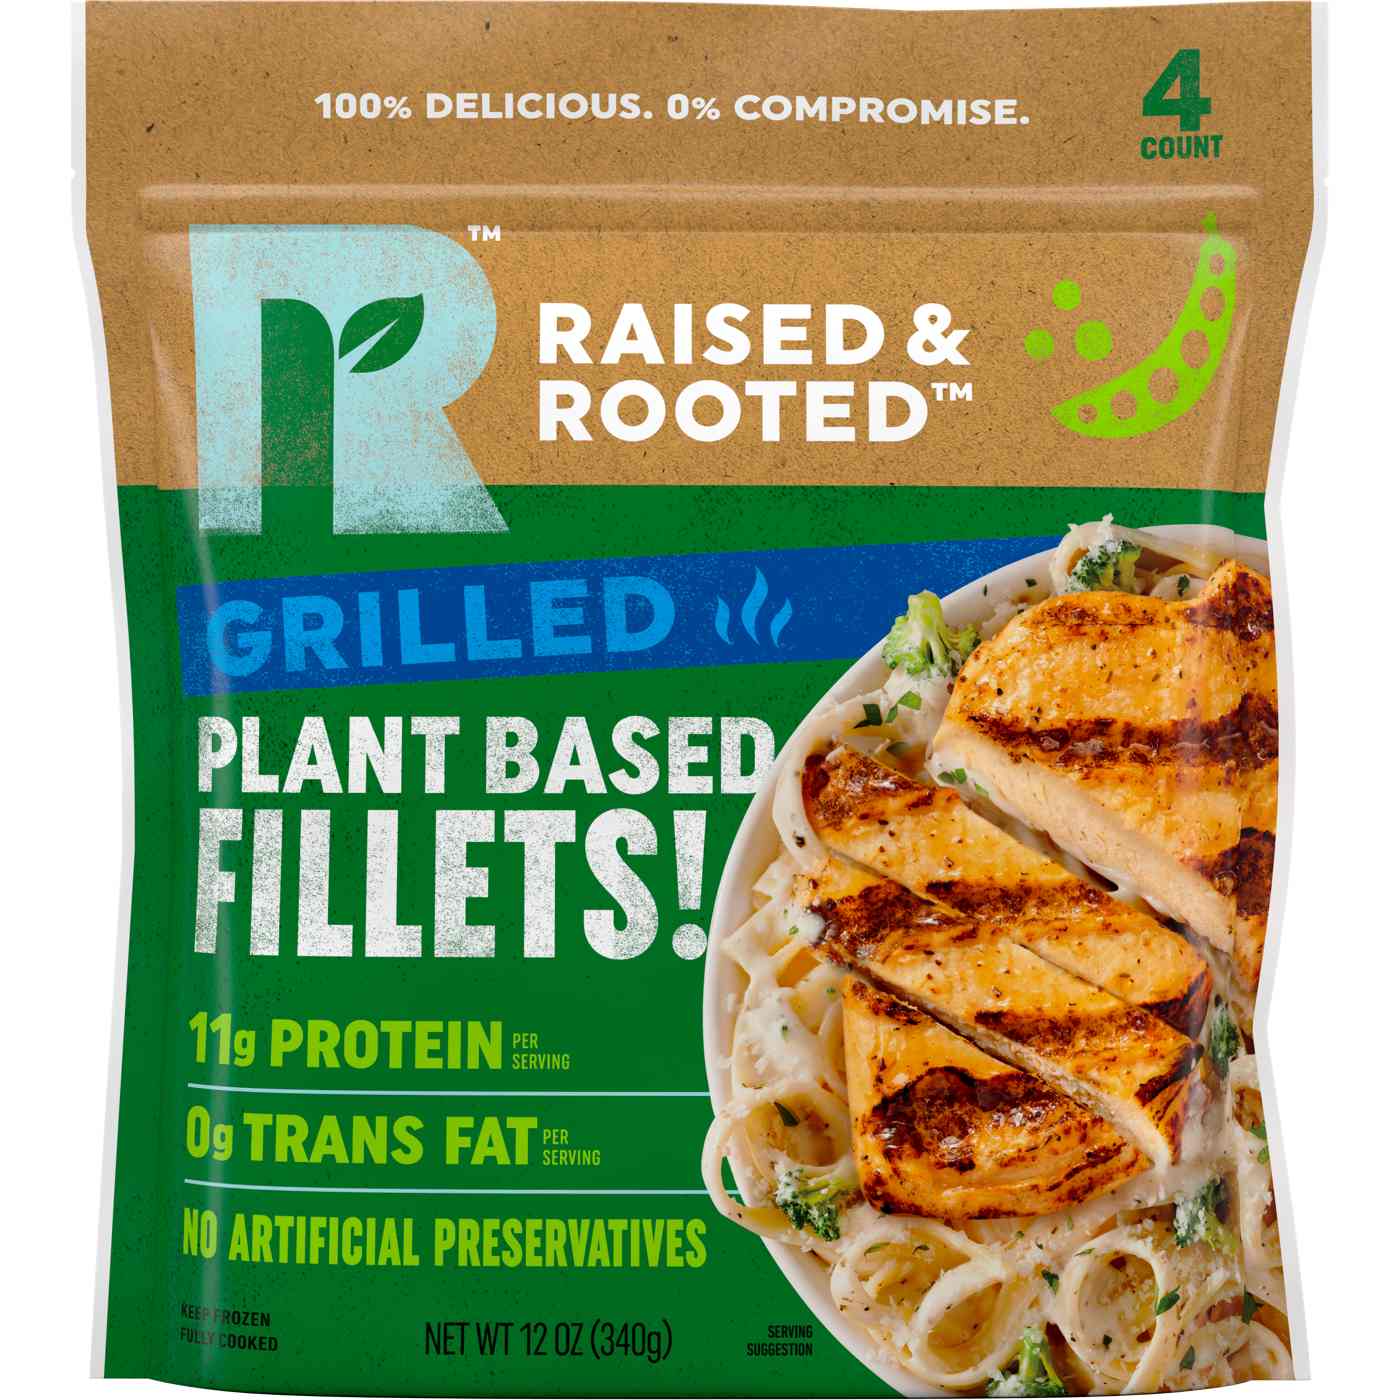 Raised & Rooted Grilled Plant Based Fillets; image 1 of 2